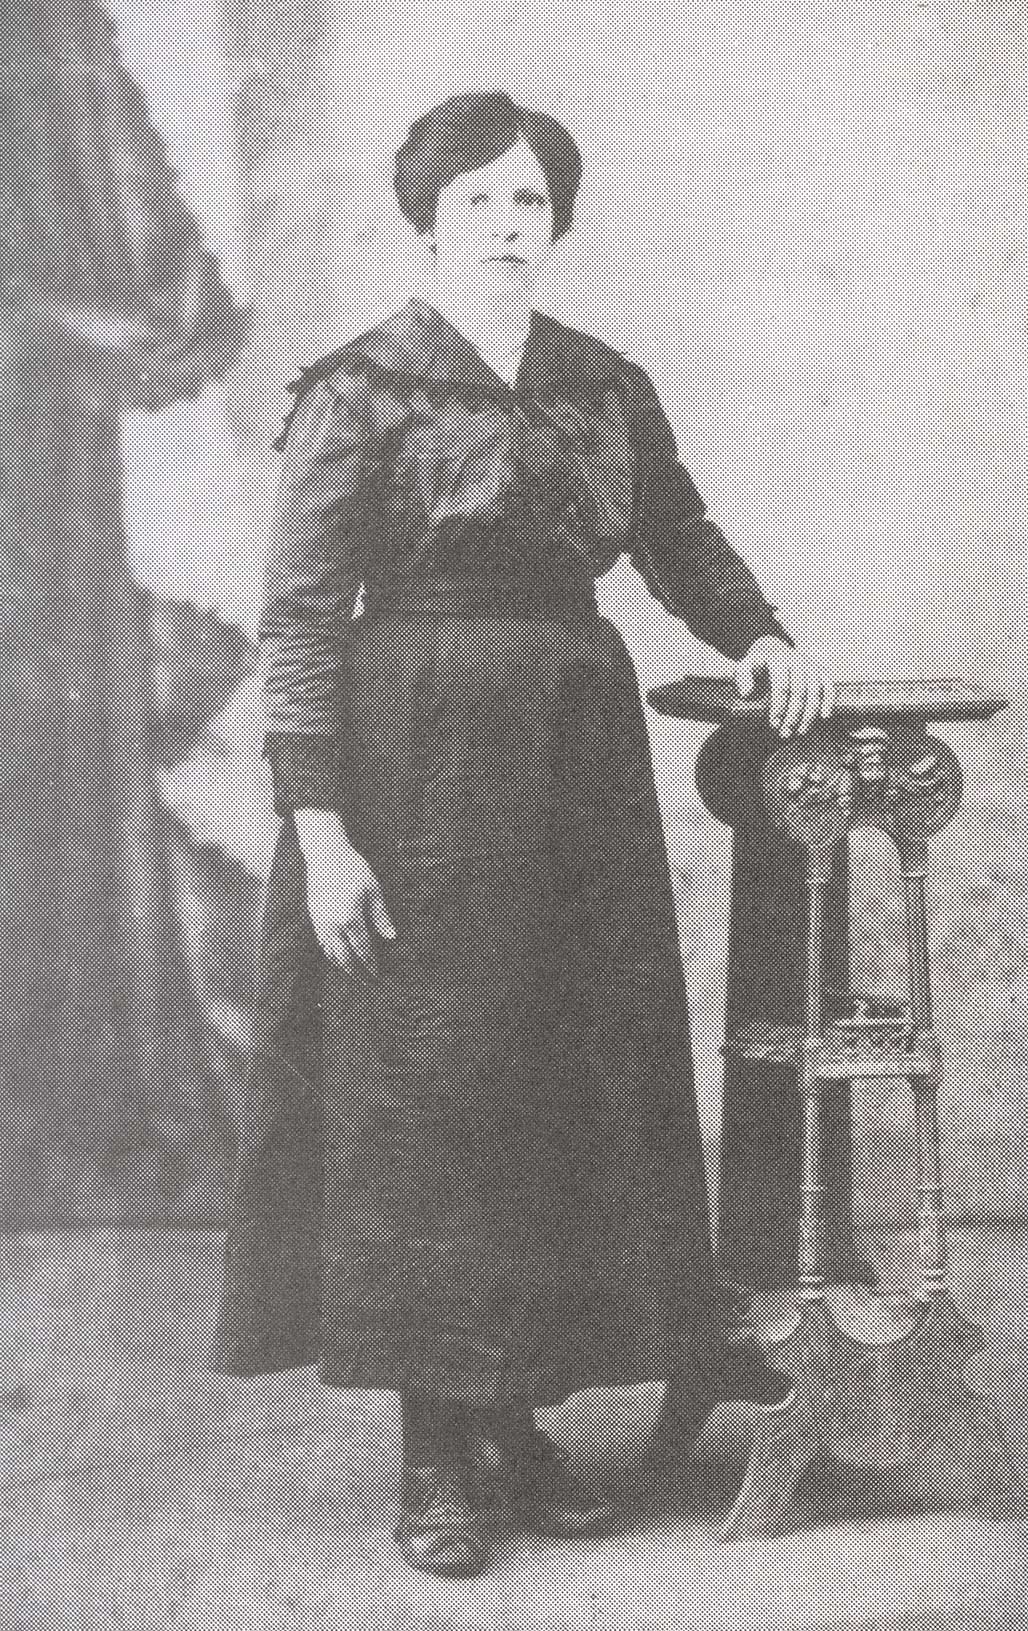 Very old image of a woman in a black dress, standing with her hand resting on a shelf.